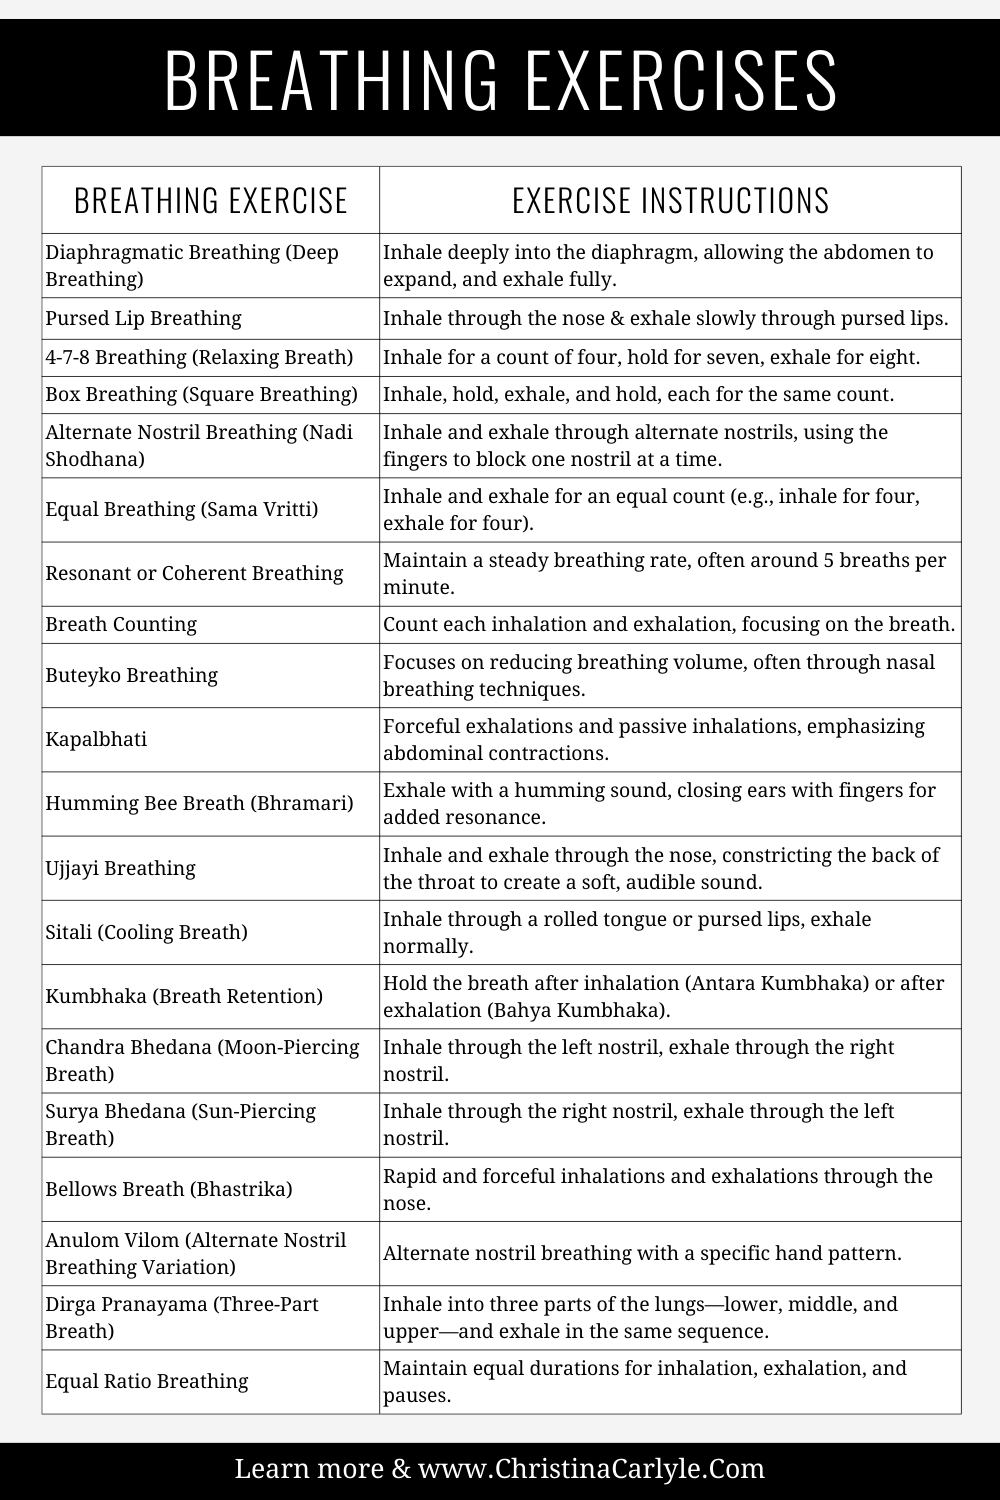 A table of different breathing exercises and the instructions to do them